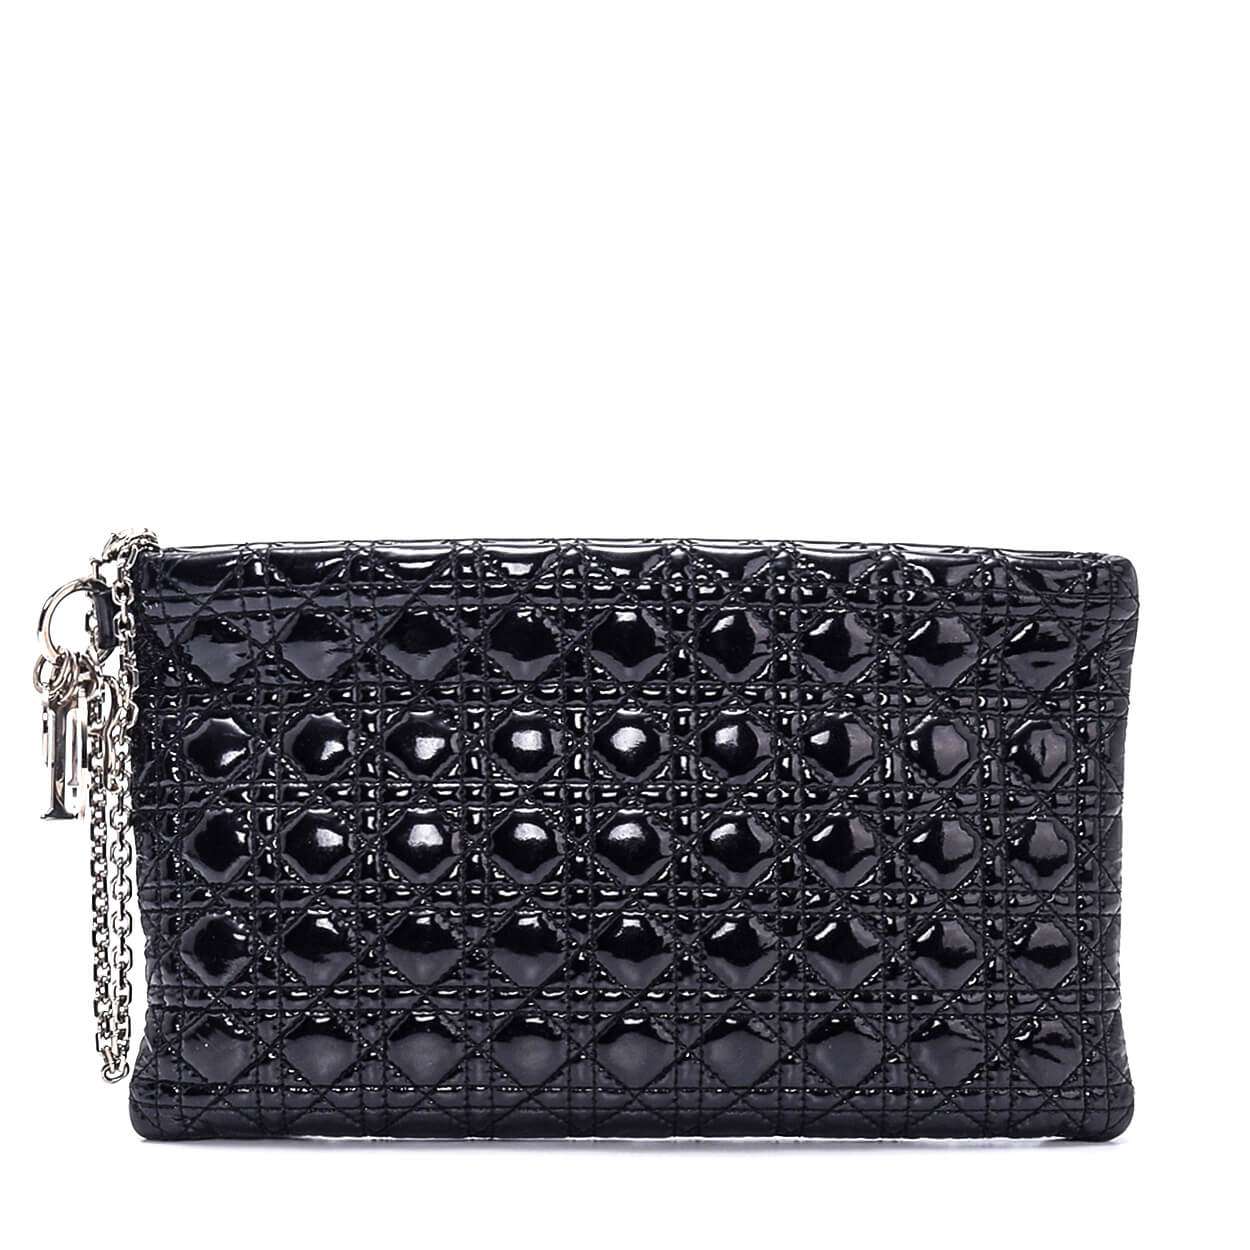 Christian Dior - Black Patent Cannage Quilted Leather Clutch